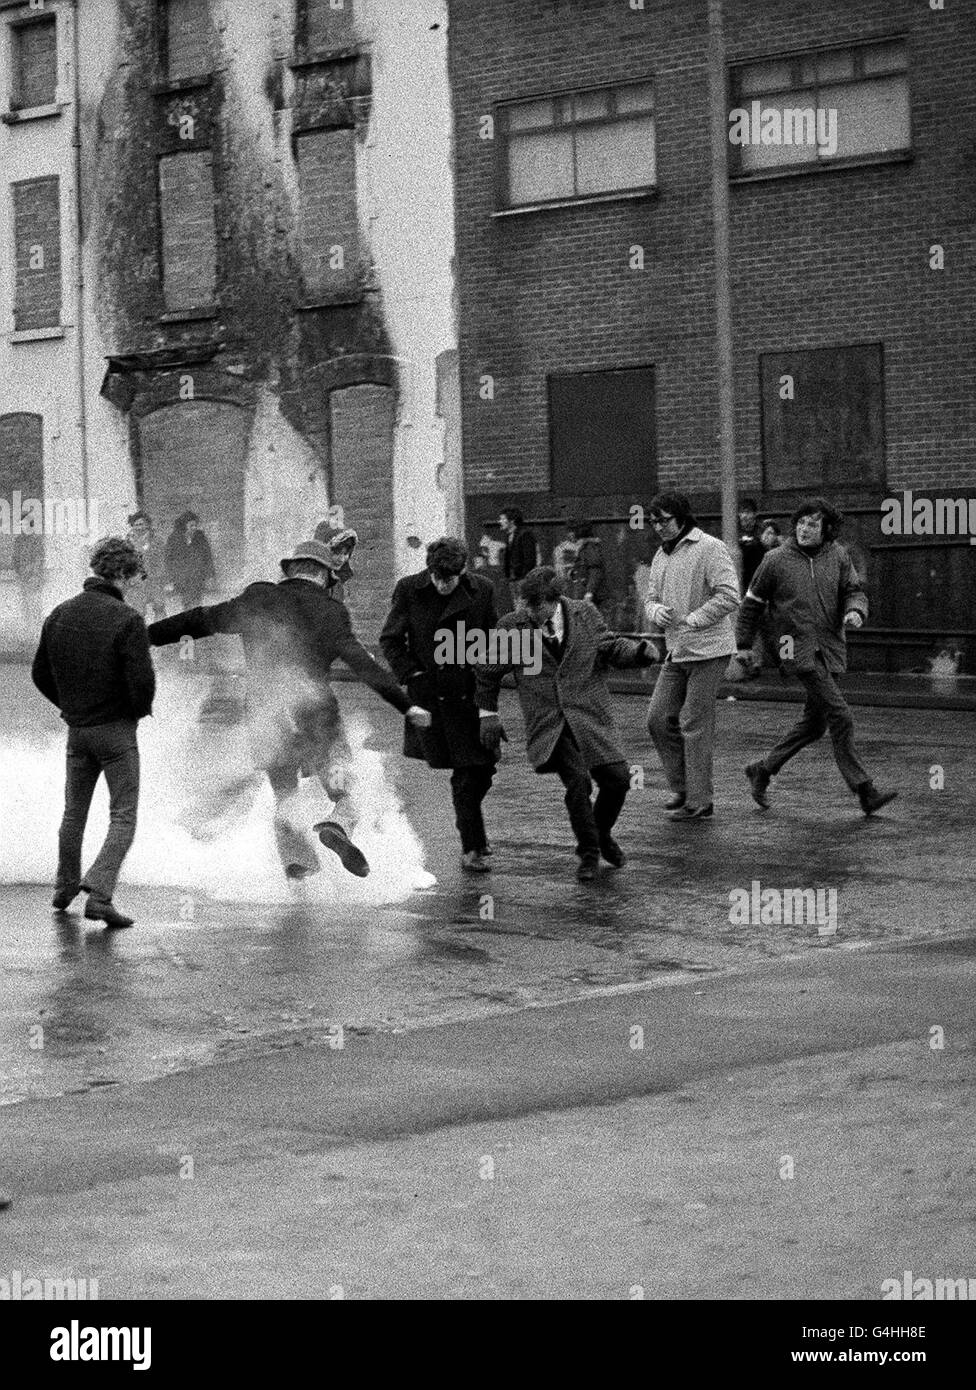 PA NEWS PHOTO 2/2/72 CS GAS IS SEEN IN USE AGAINST BOGSIDERS AFTER THE MASS FUNERALS HERE. THIS INCIDENT WAS NEAR WILLIAM STREET, THE SCENE OF SUNDAY'S SHOOTINGS IN LONDONDERRY Stock Photo